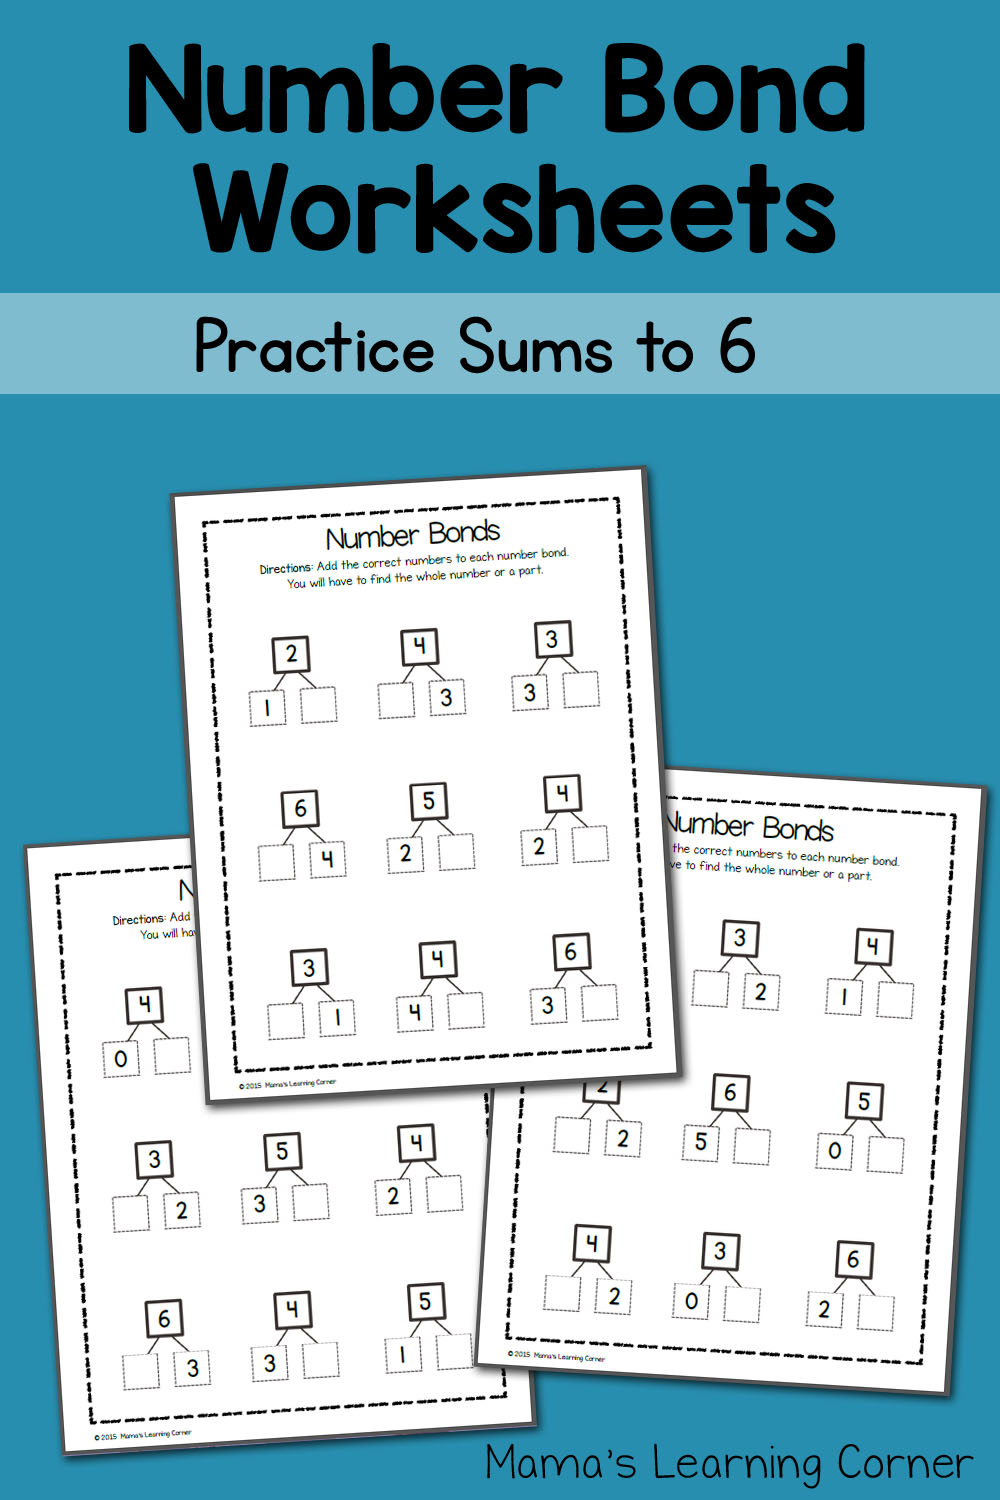 Number Bond Worksheets: Sums to 6 - Mamas Learning Corner